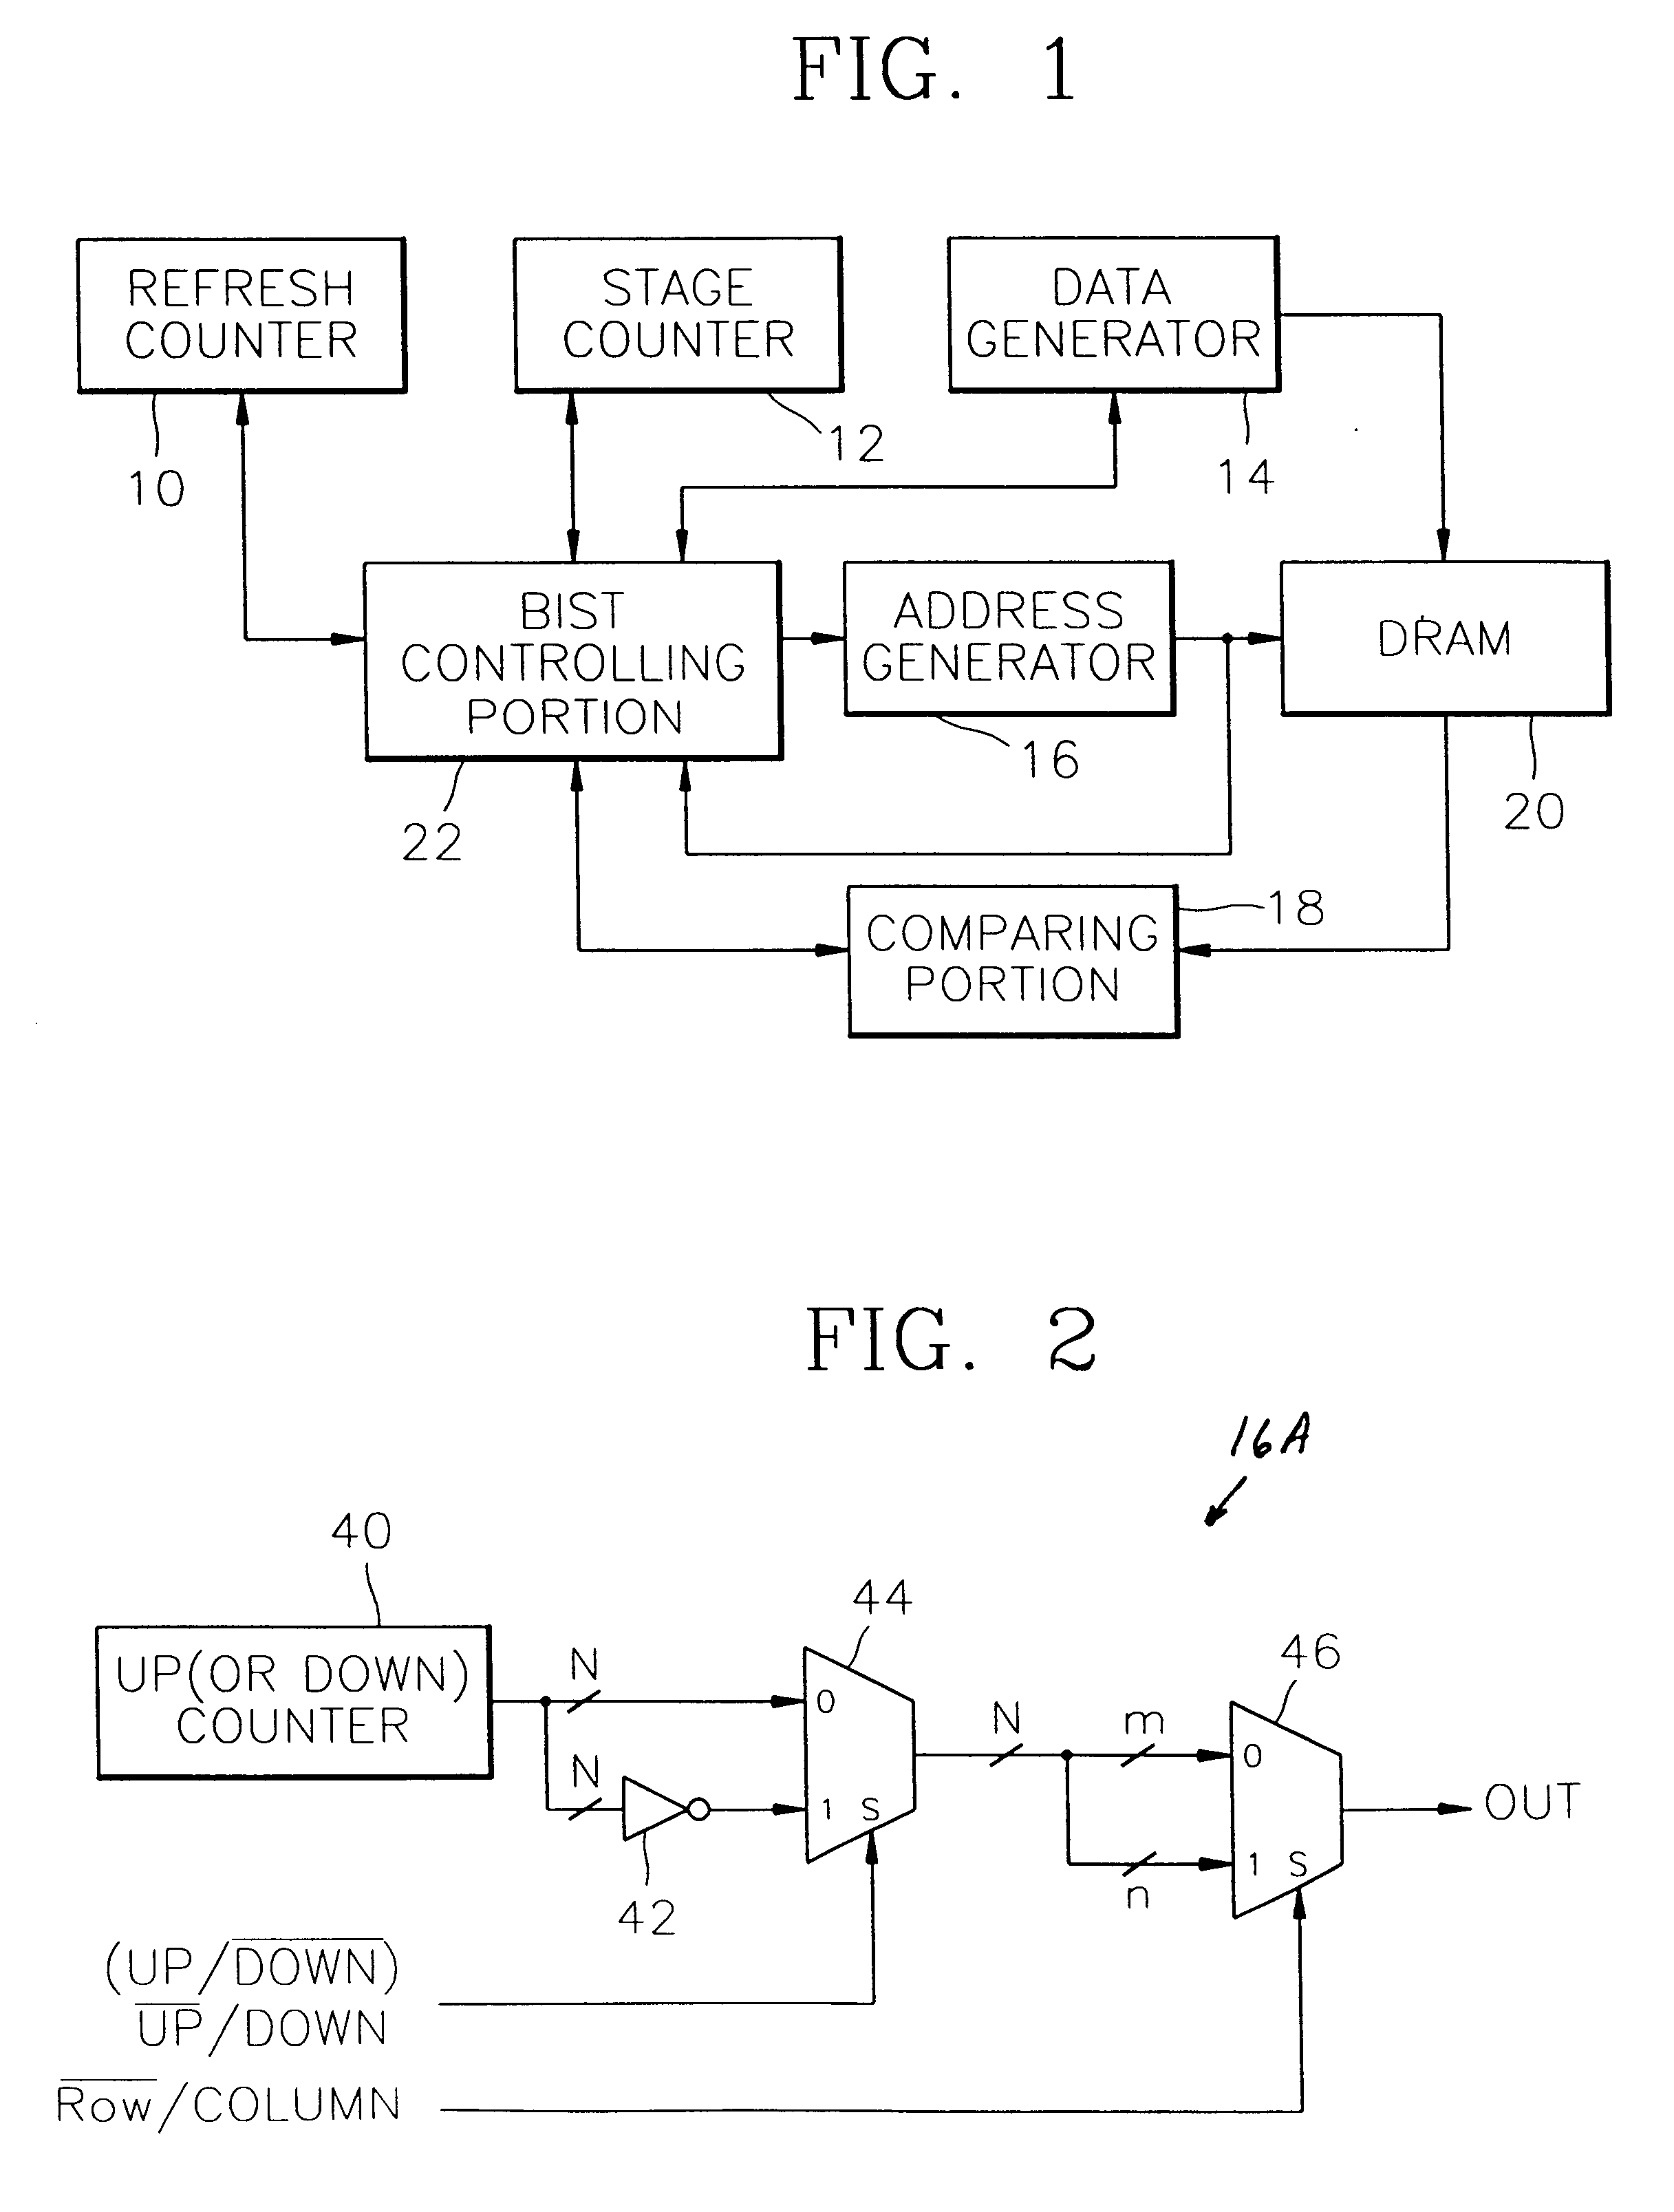 Apparatus and method for generating addresses in a built-in self memory testing circuit